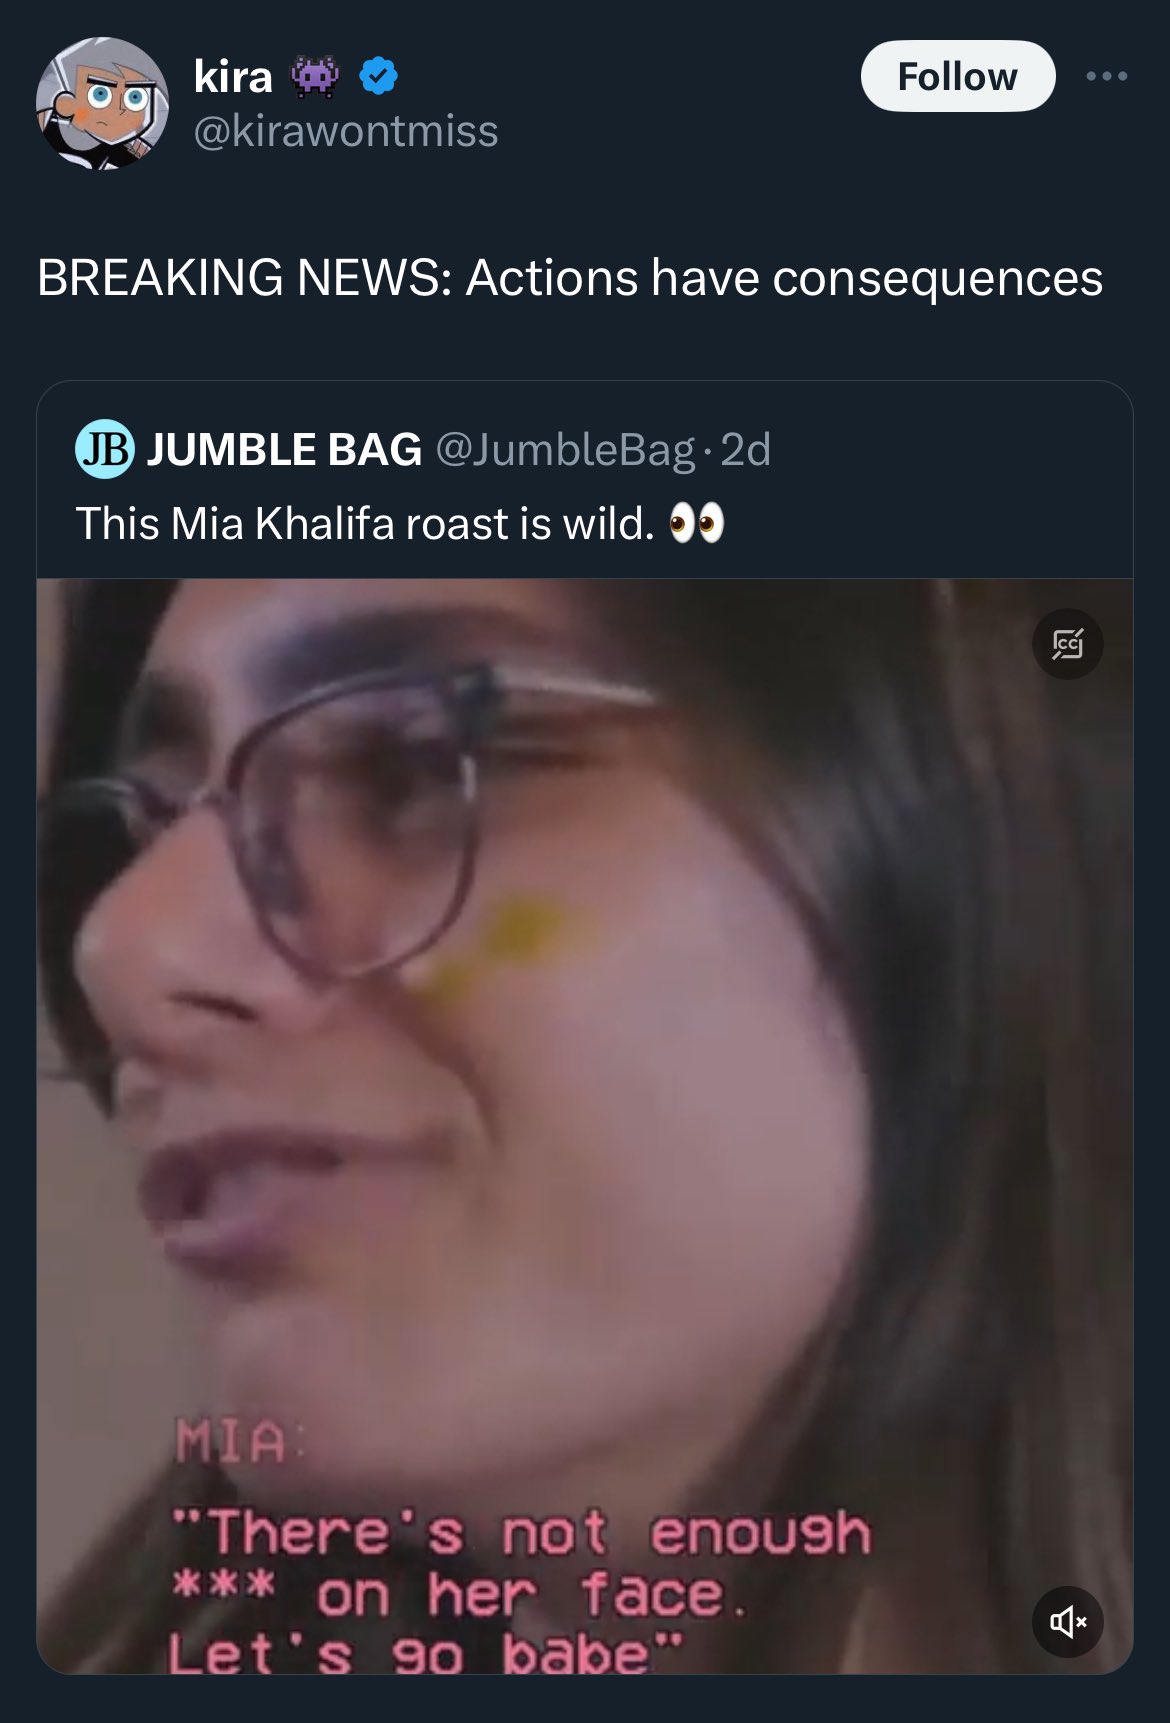 Same way many brozzers know about Mia Khalifa but don't watch p